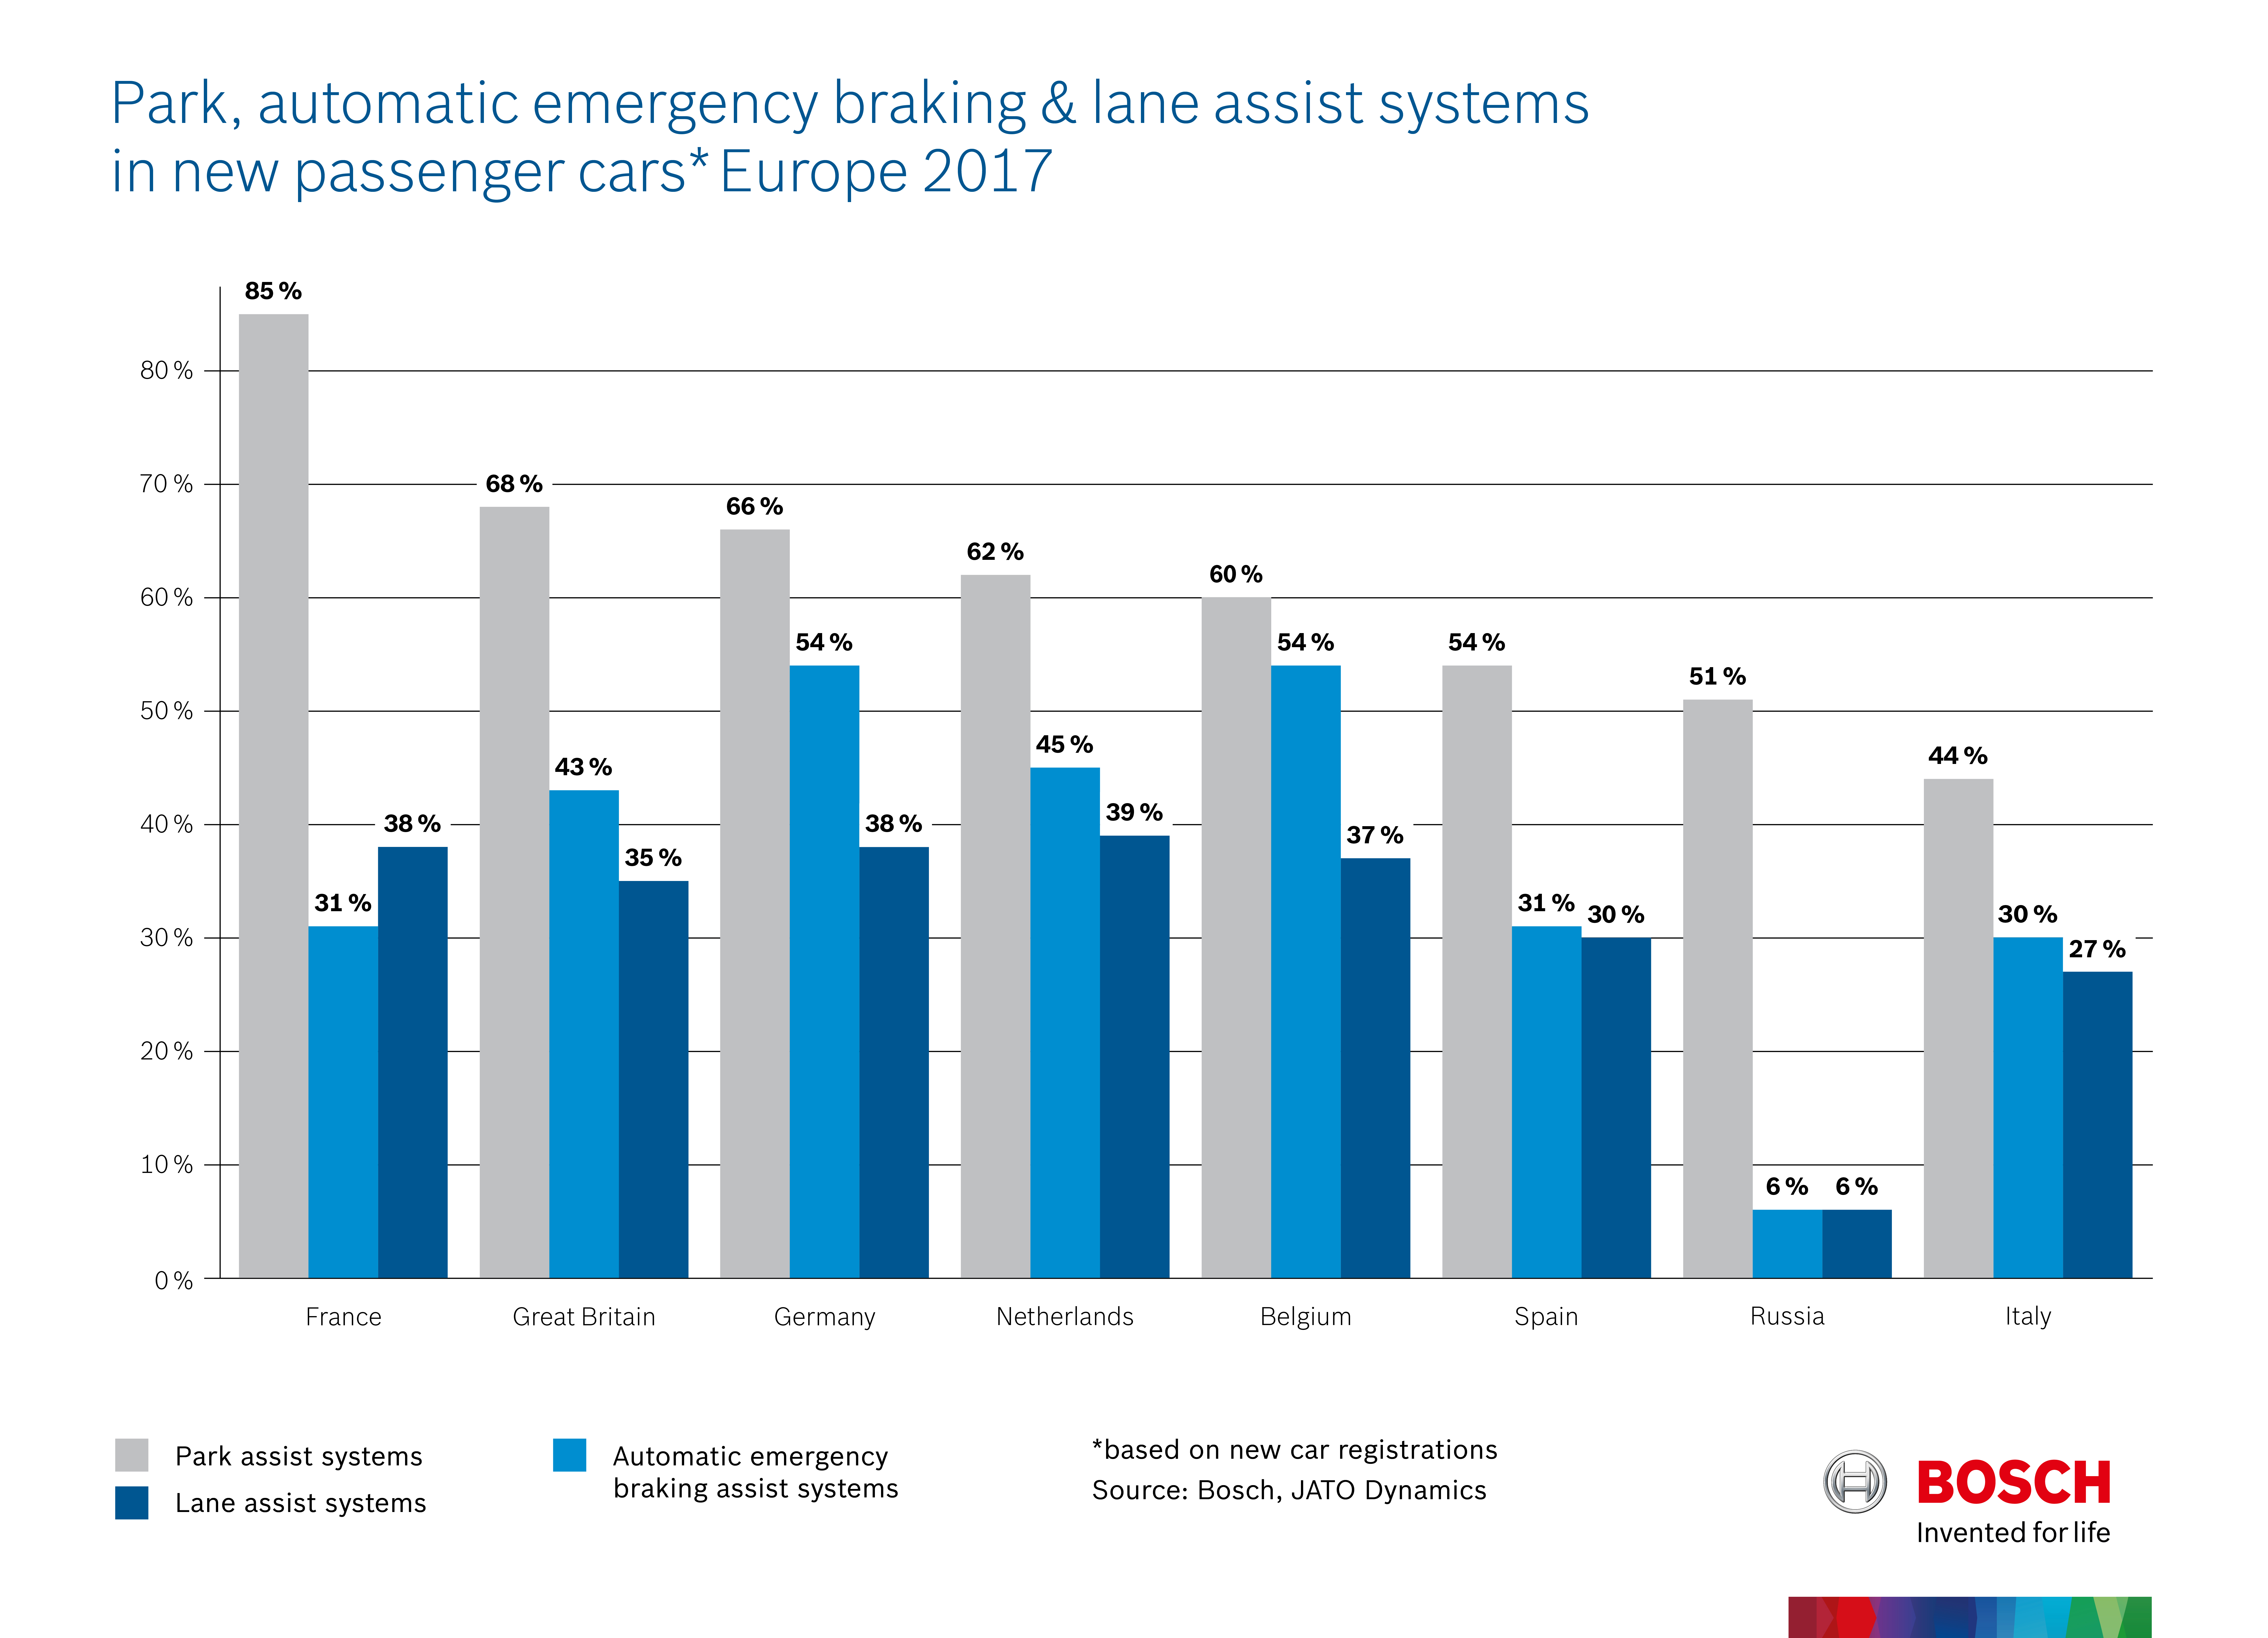 Park, automatic emergency braking and lane assist systems in new passenger cars, Europe 2017